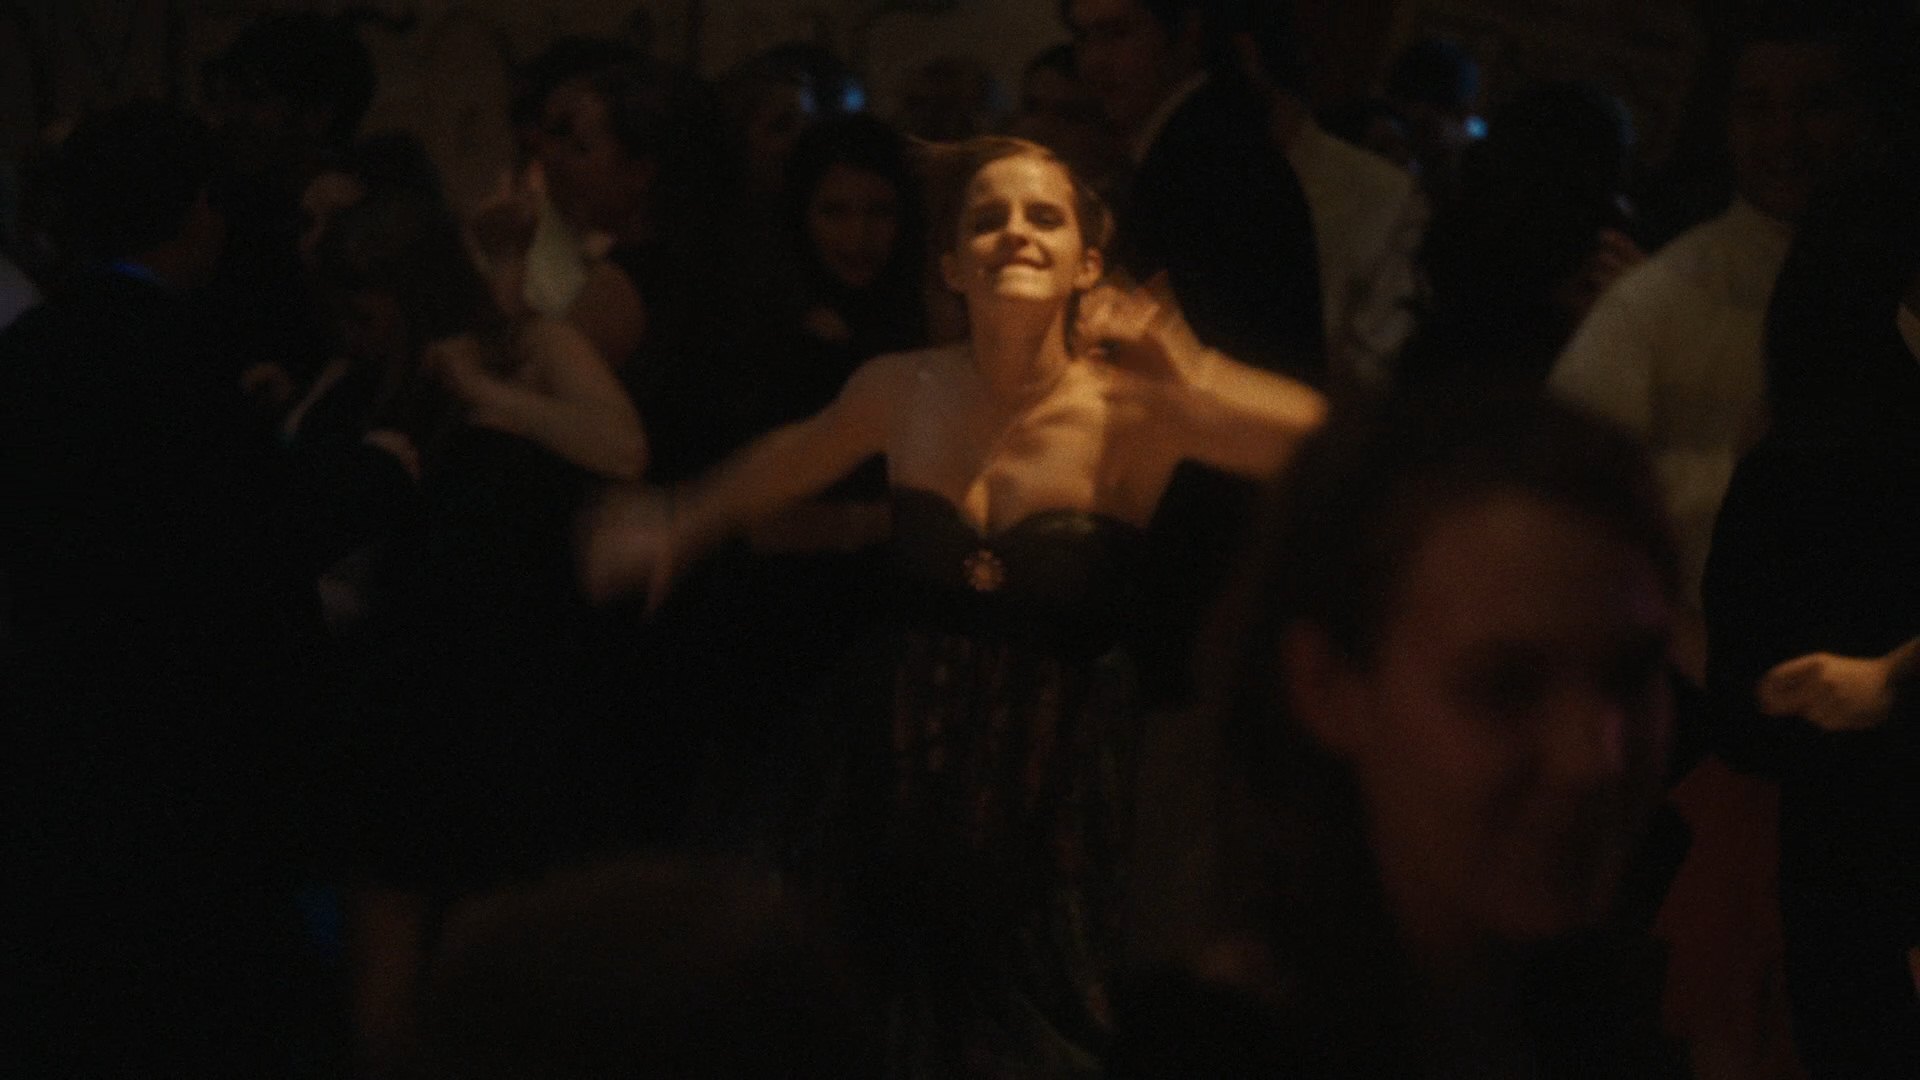 Naked Emma Watson In The Perks Of Being A Wallflower